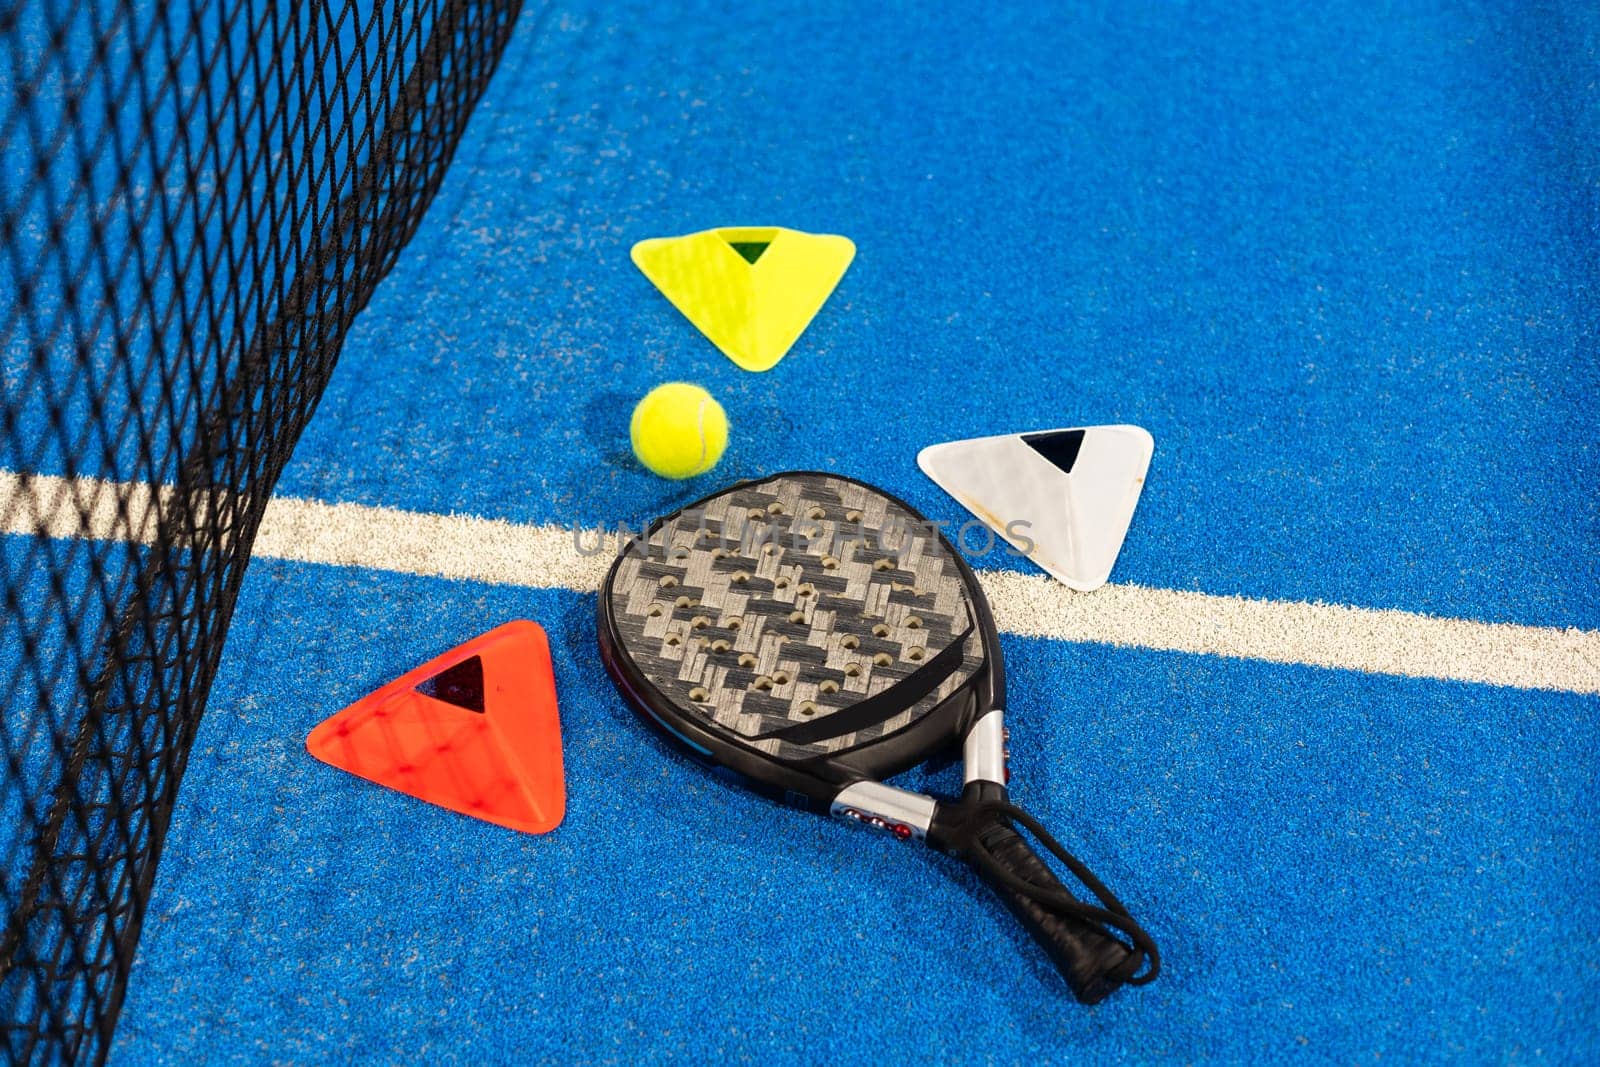 Black professional paddle tennis racket and ball with natural lighting on blue background. Horizontal sport theme poster, greeting cards, headers, website and app by Andelov13